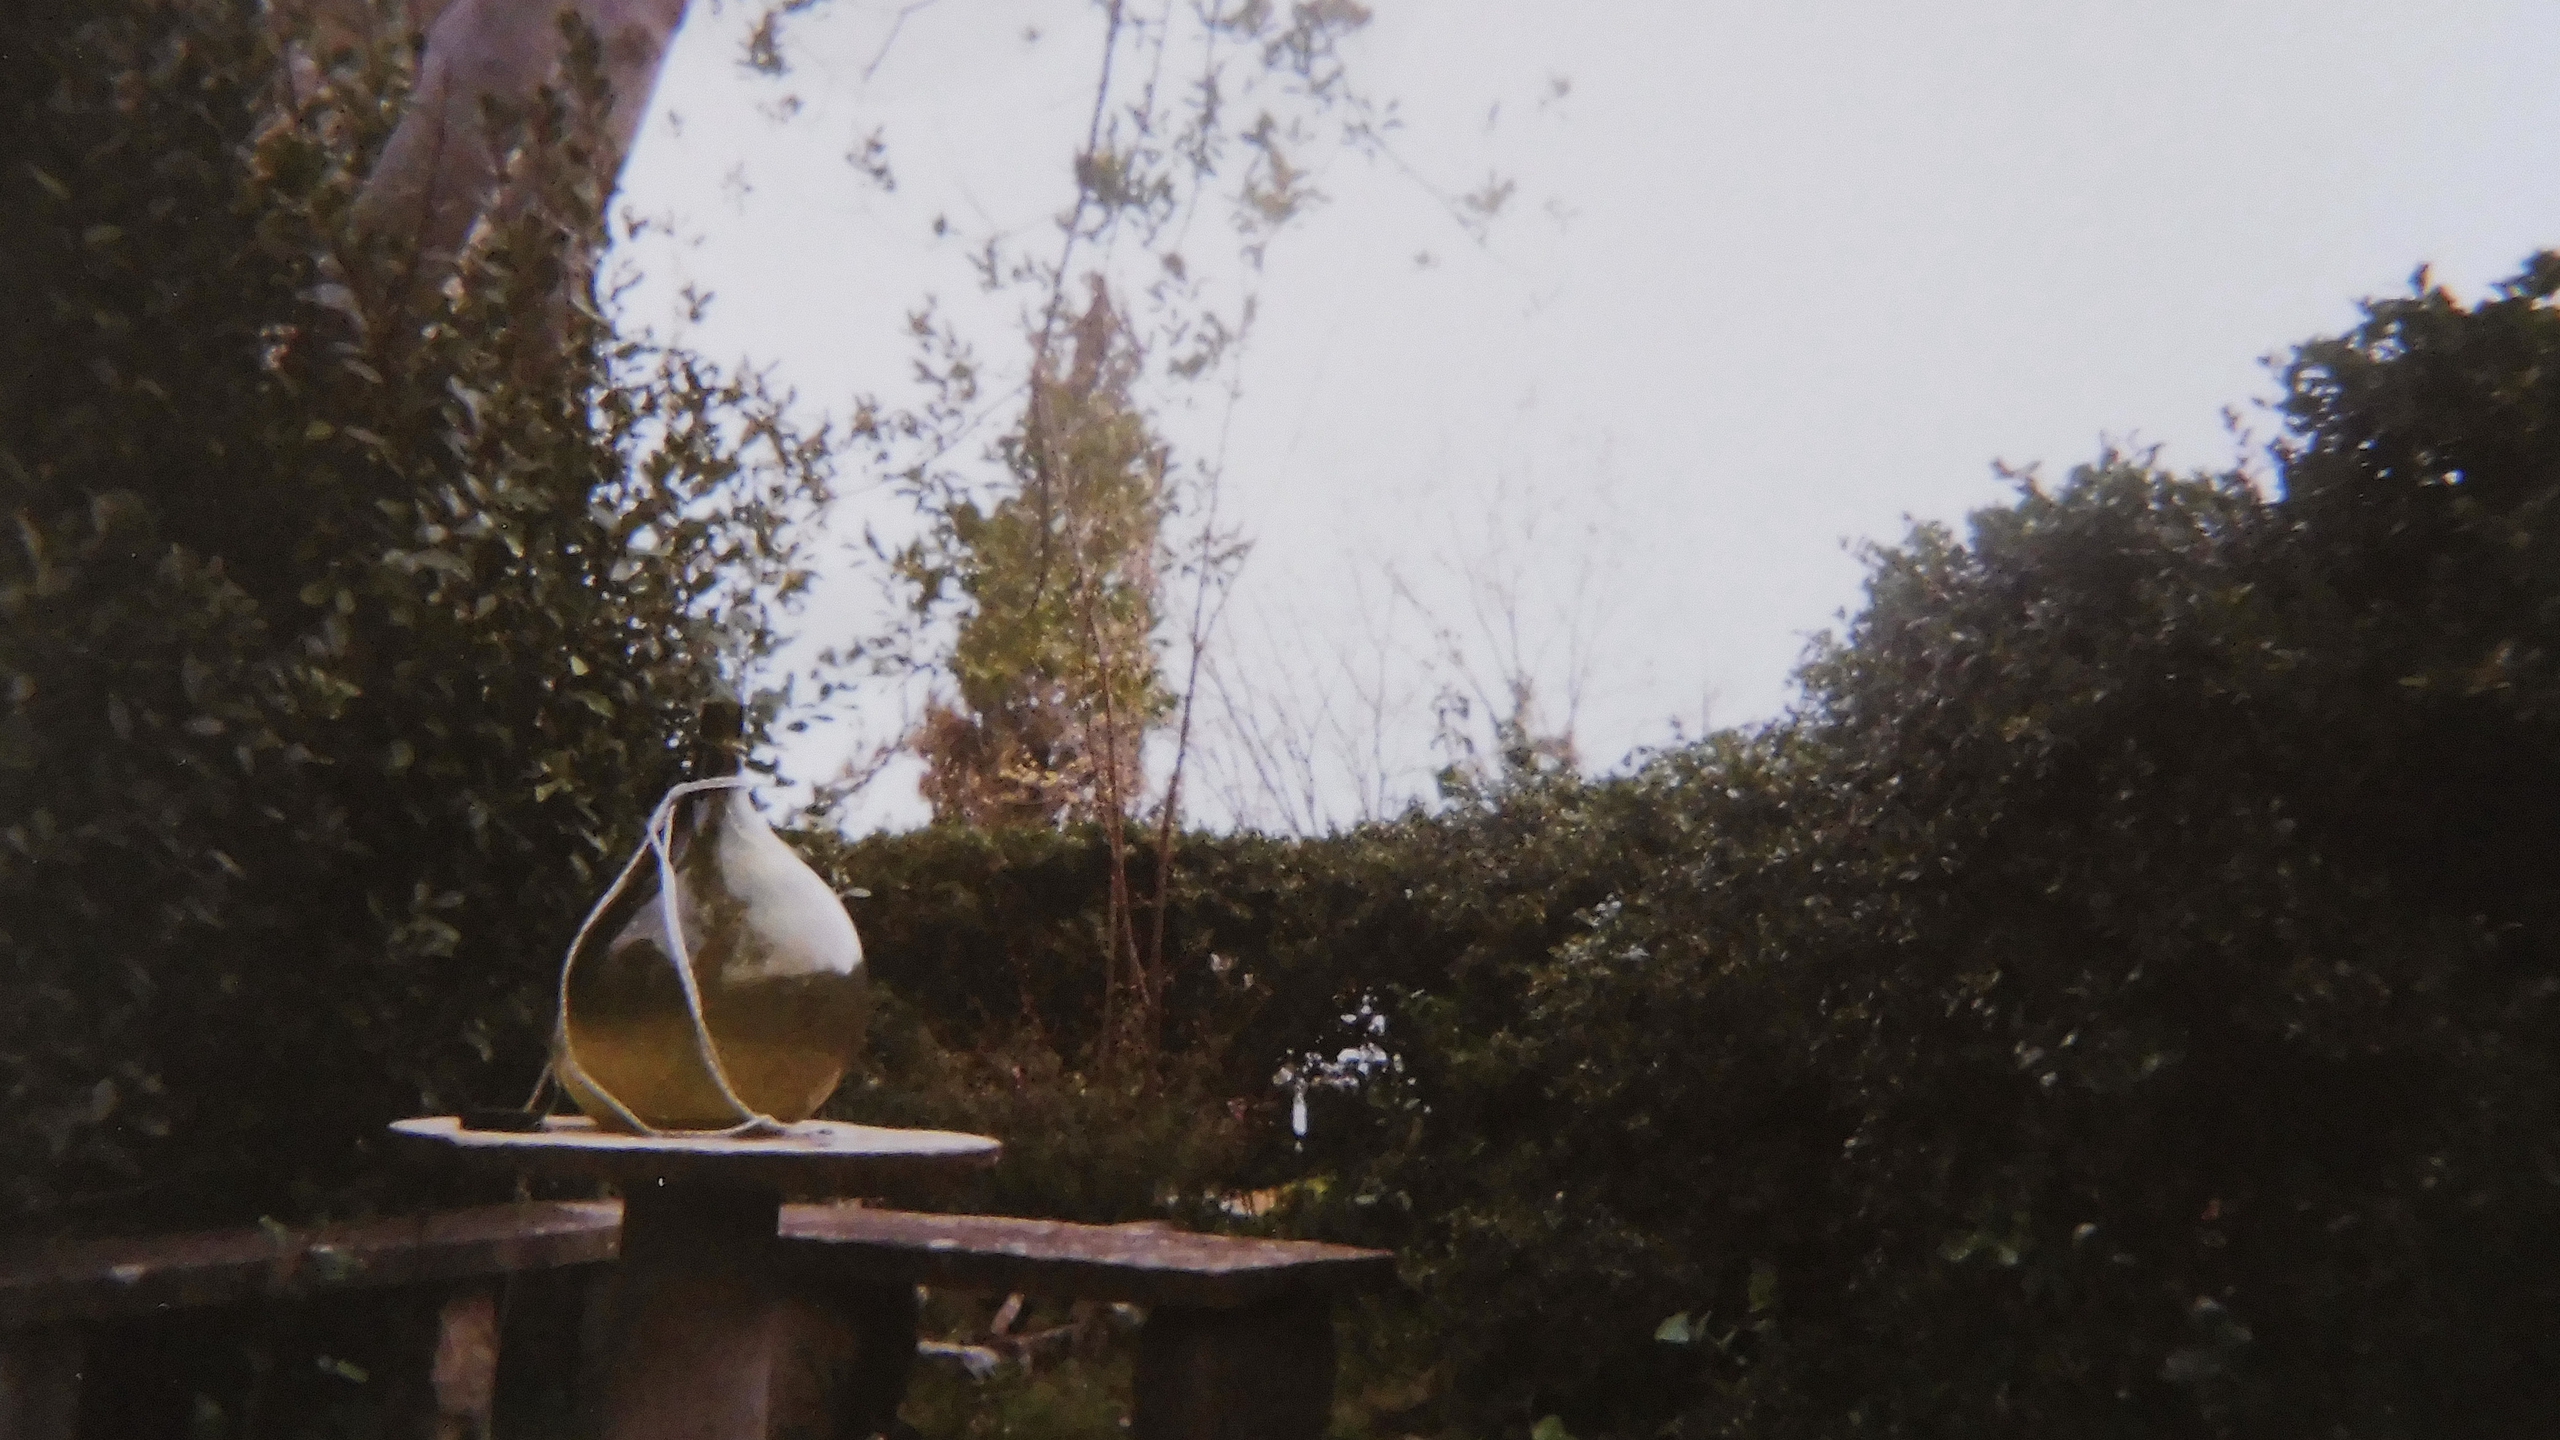 Photograph of a garden showing in the foreground a wine bottle on a table with a bench, and behind it a hedge and some trees.